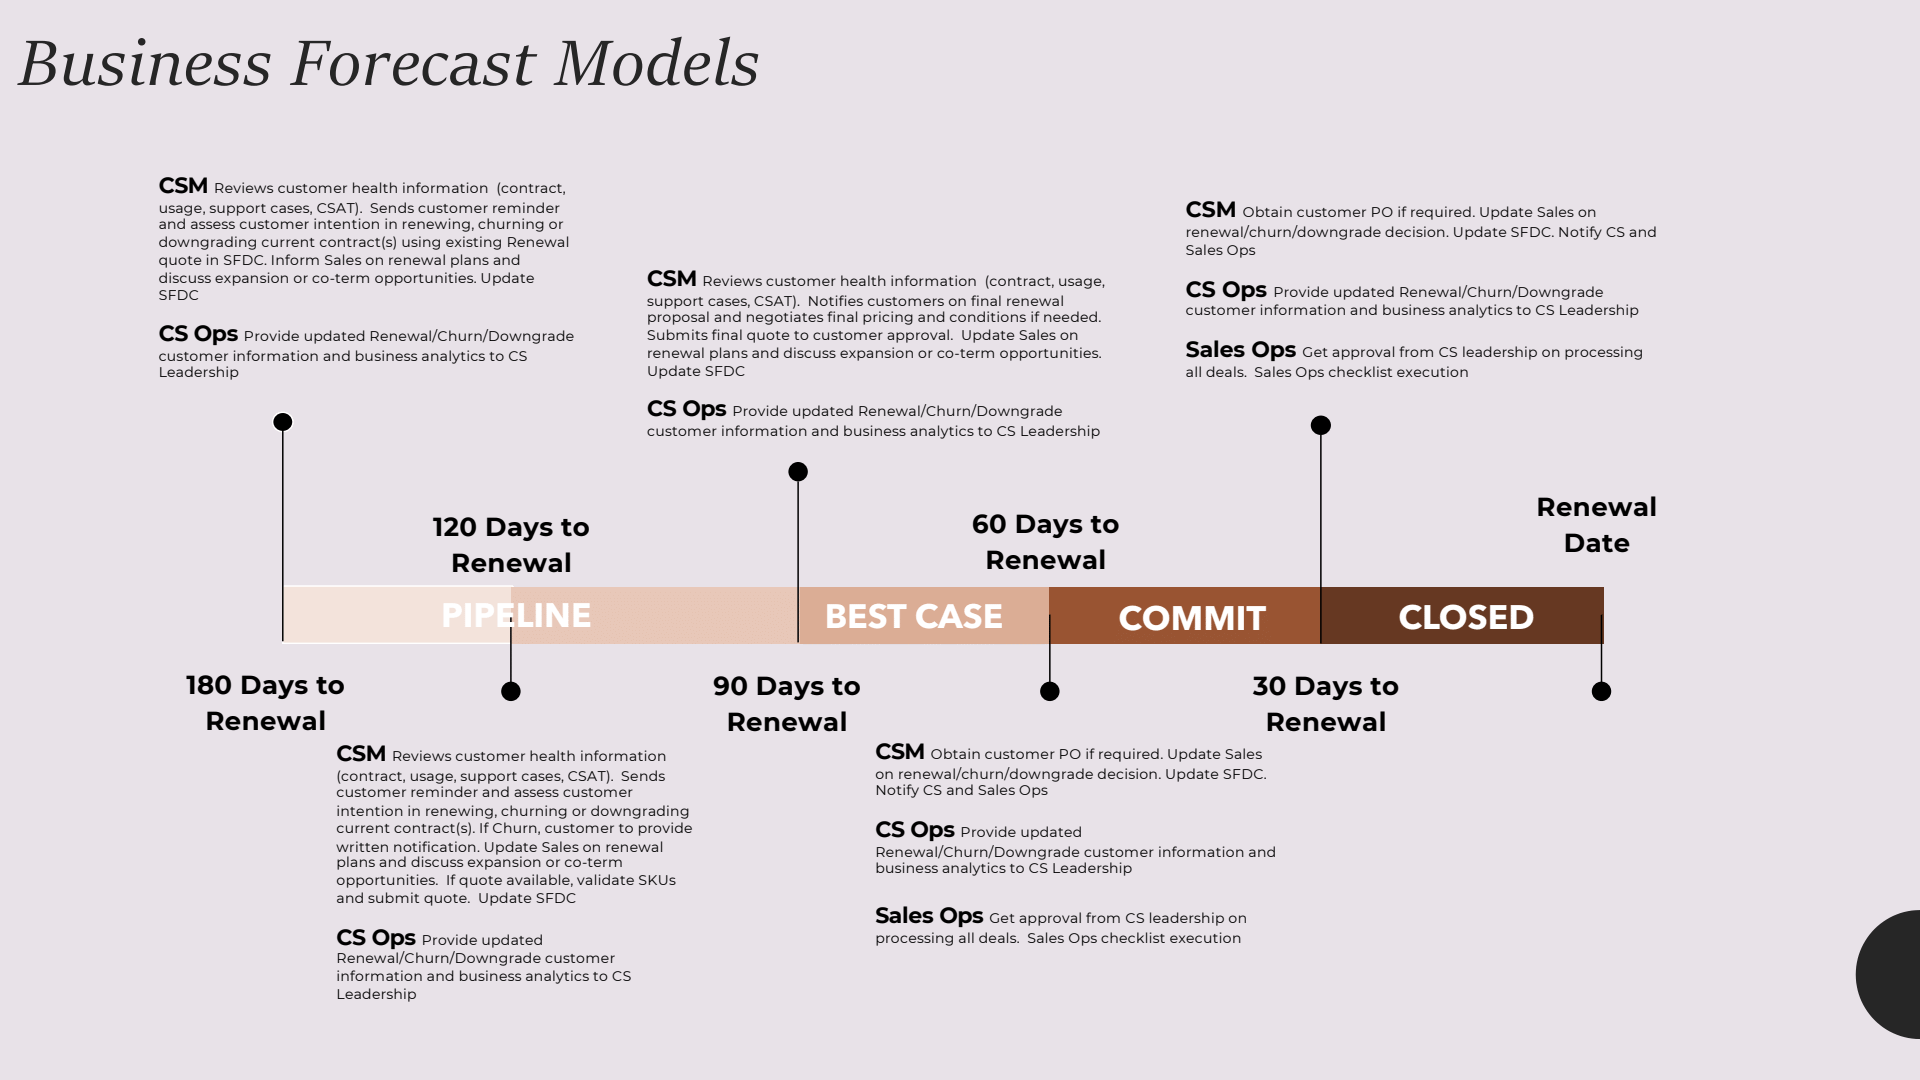 Image shows slide titled "Business forecast models with timeline from 180 days to renewal to renewal date.